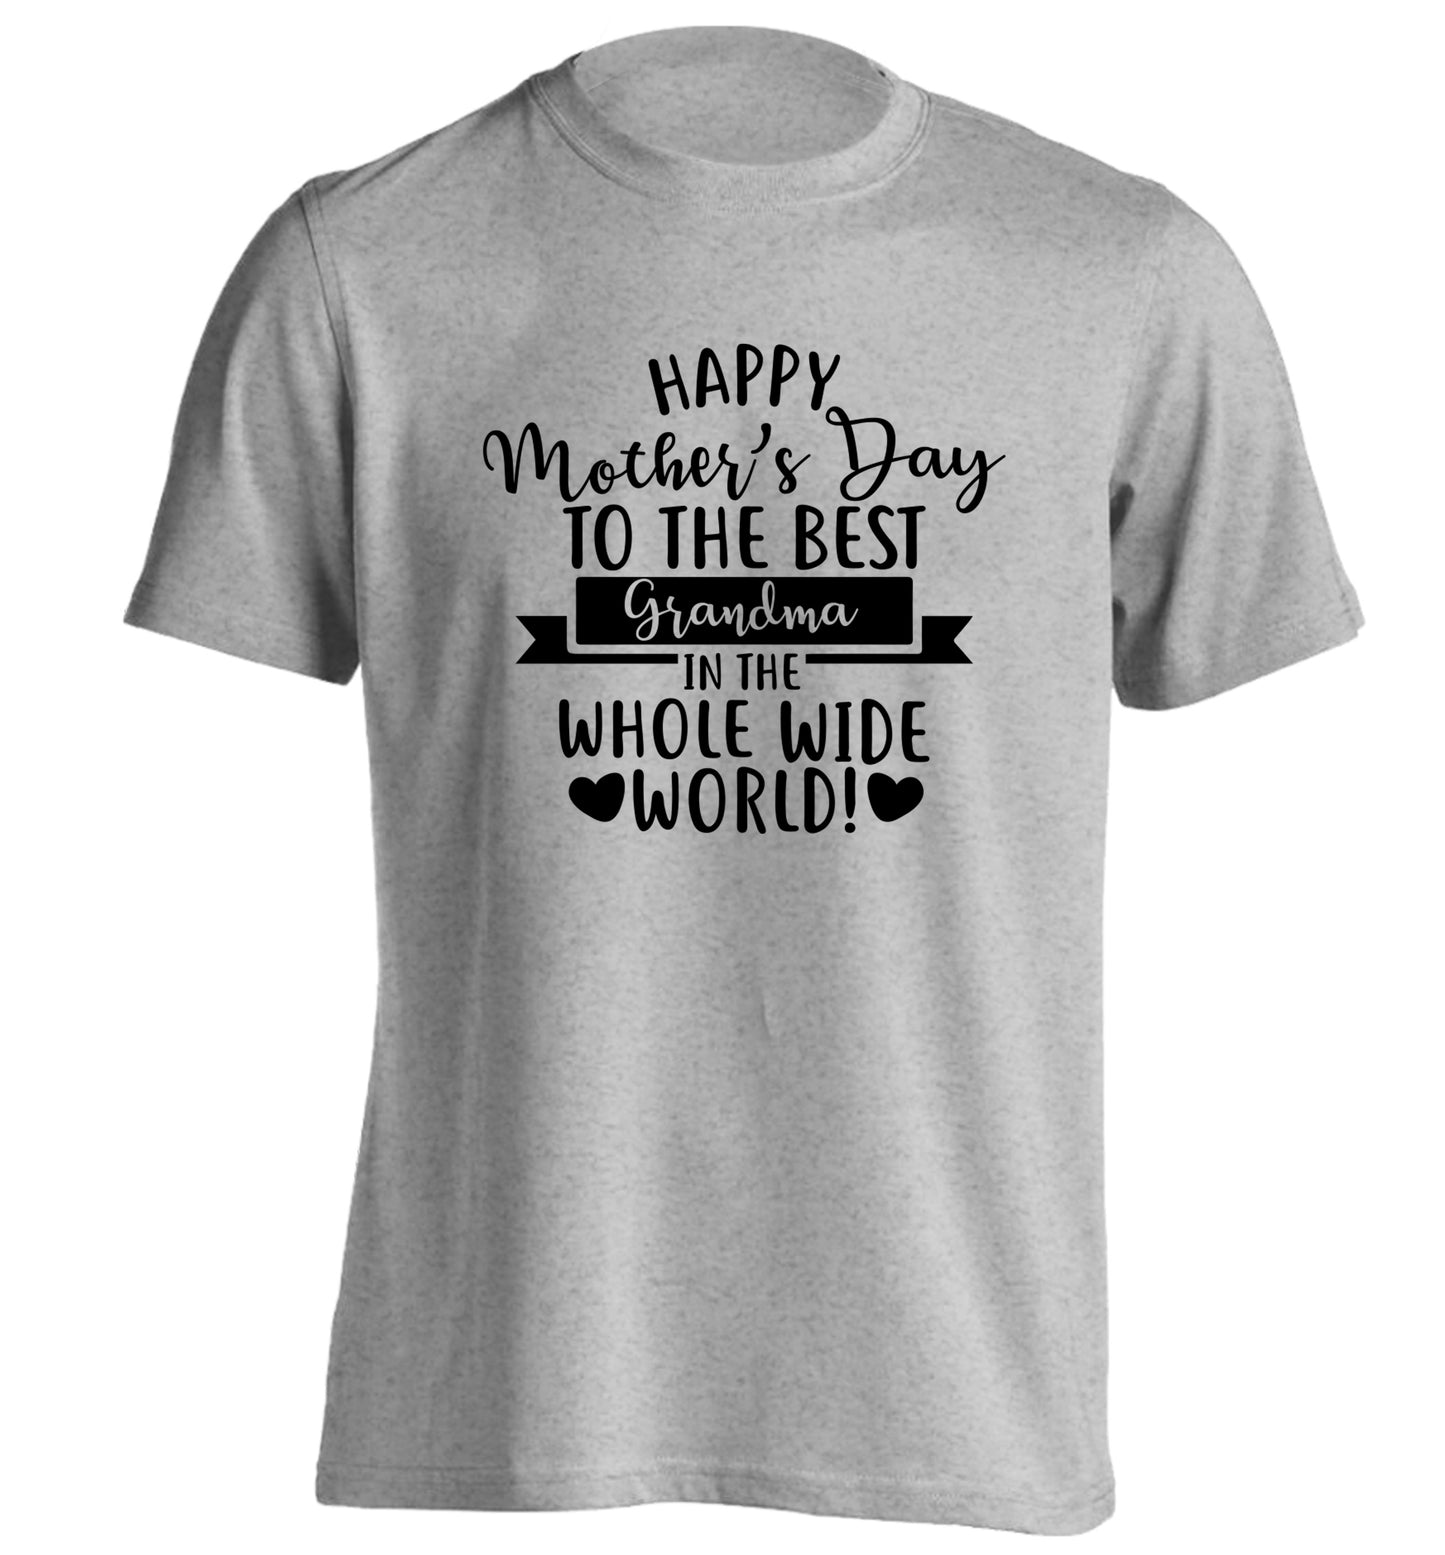 Happy mother's day to the best Grandma in the world adults unisex grey Tshirt 2XL